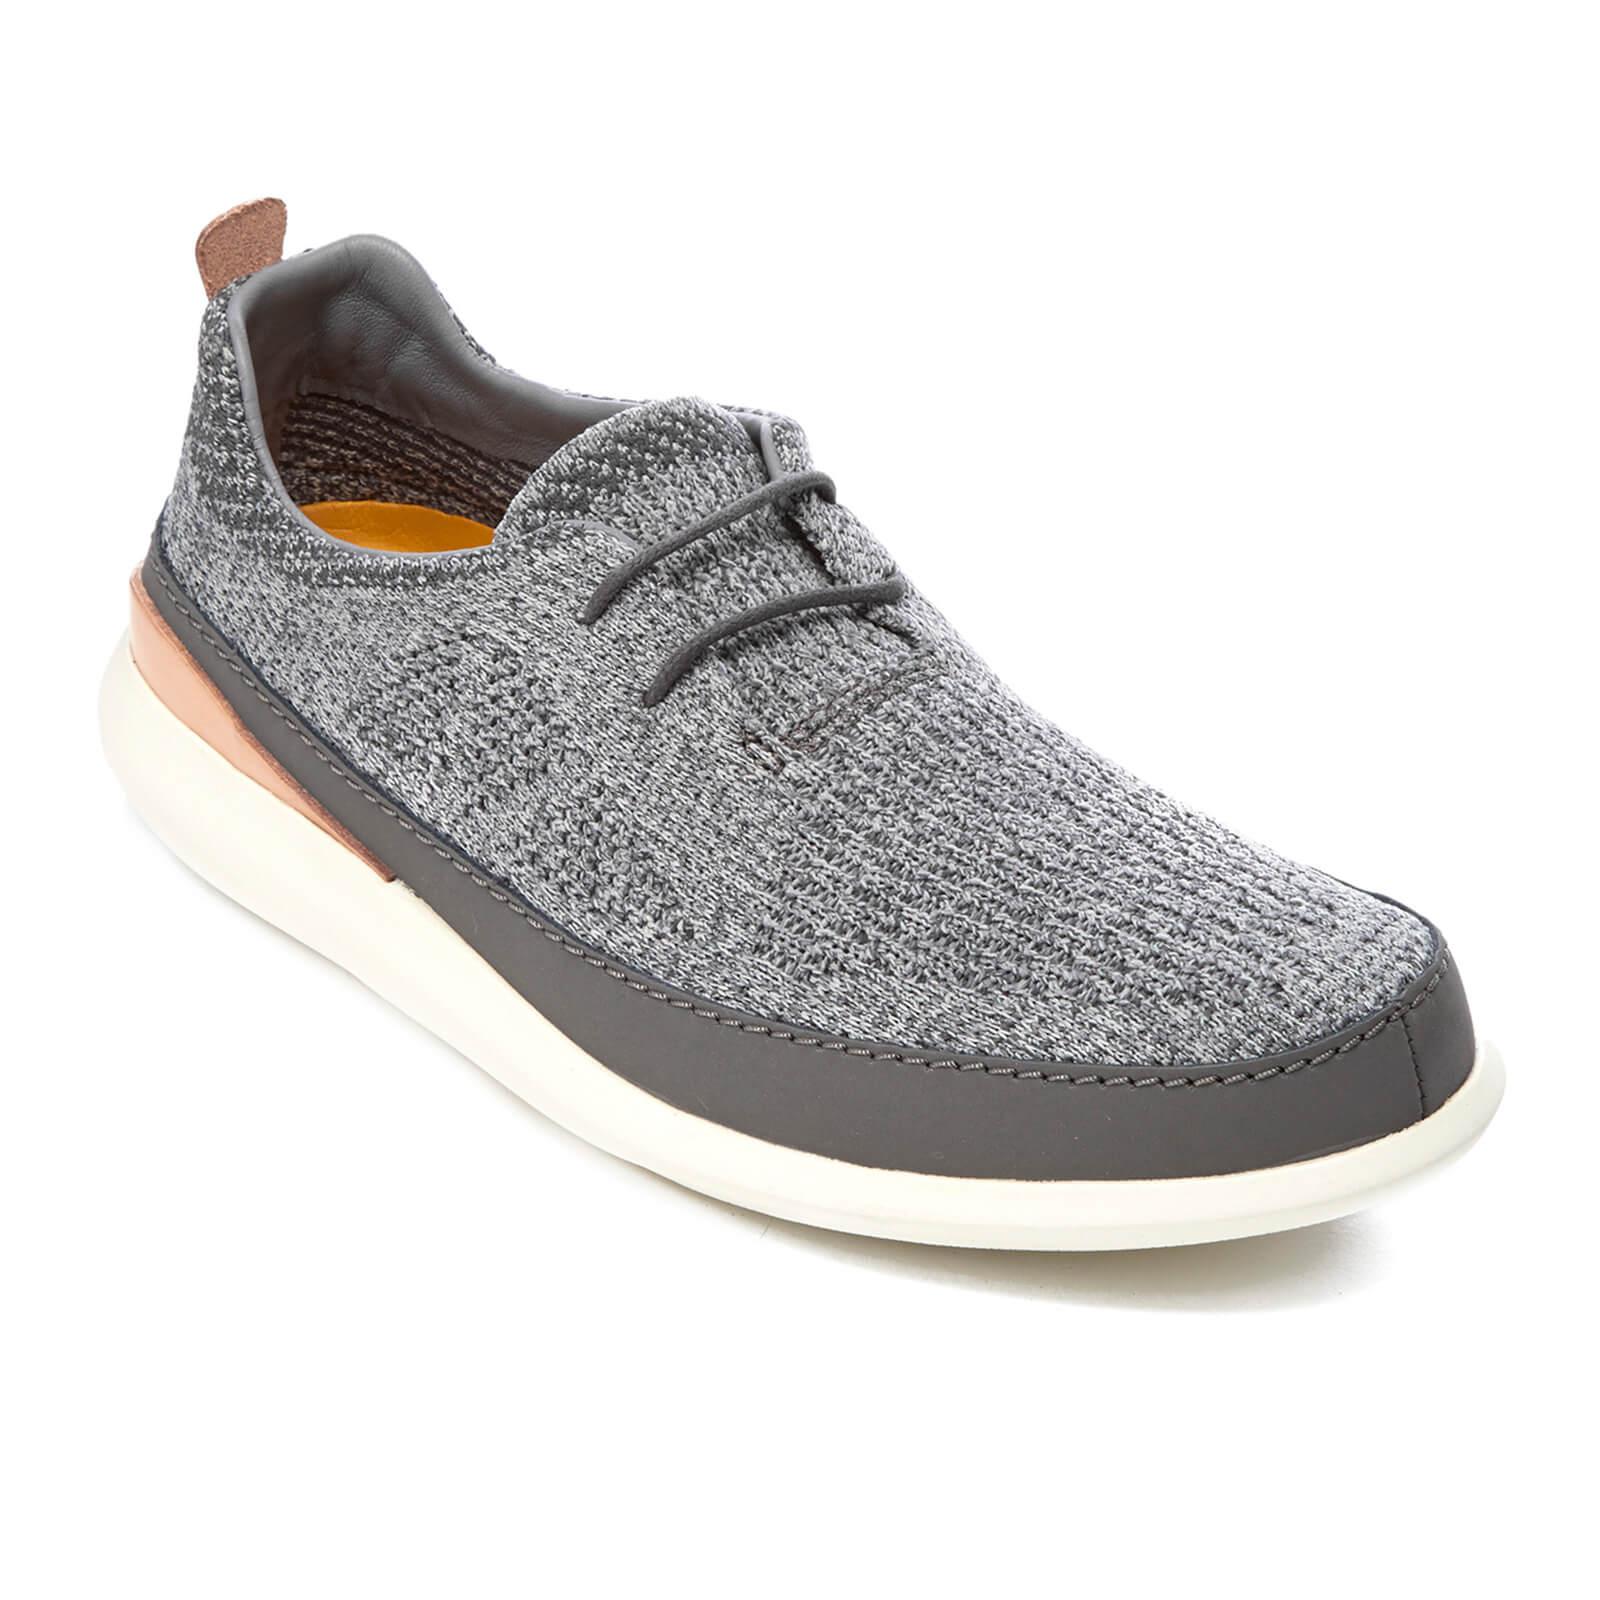 Clarks Wool Pitman Run Textile Runner Trainers in Grey (Gray) for Men - Lyst